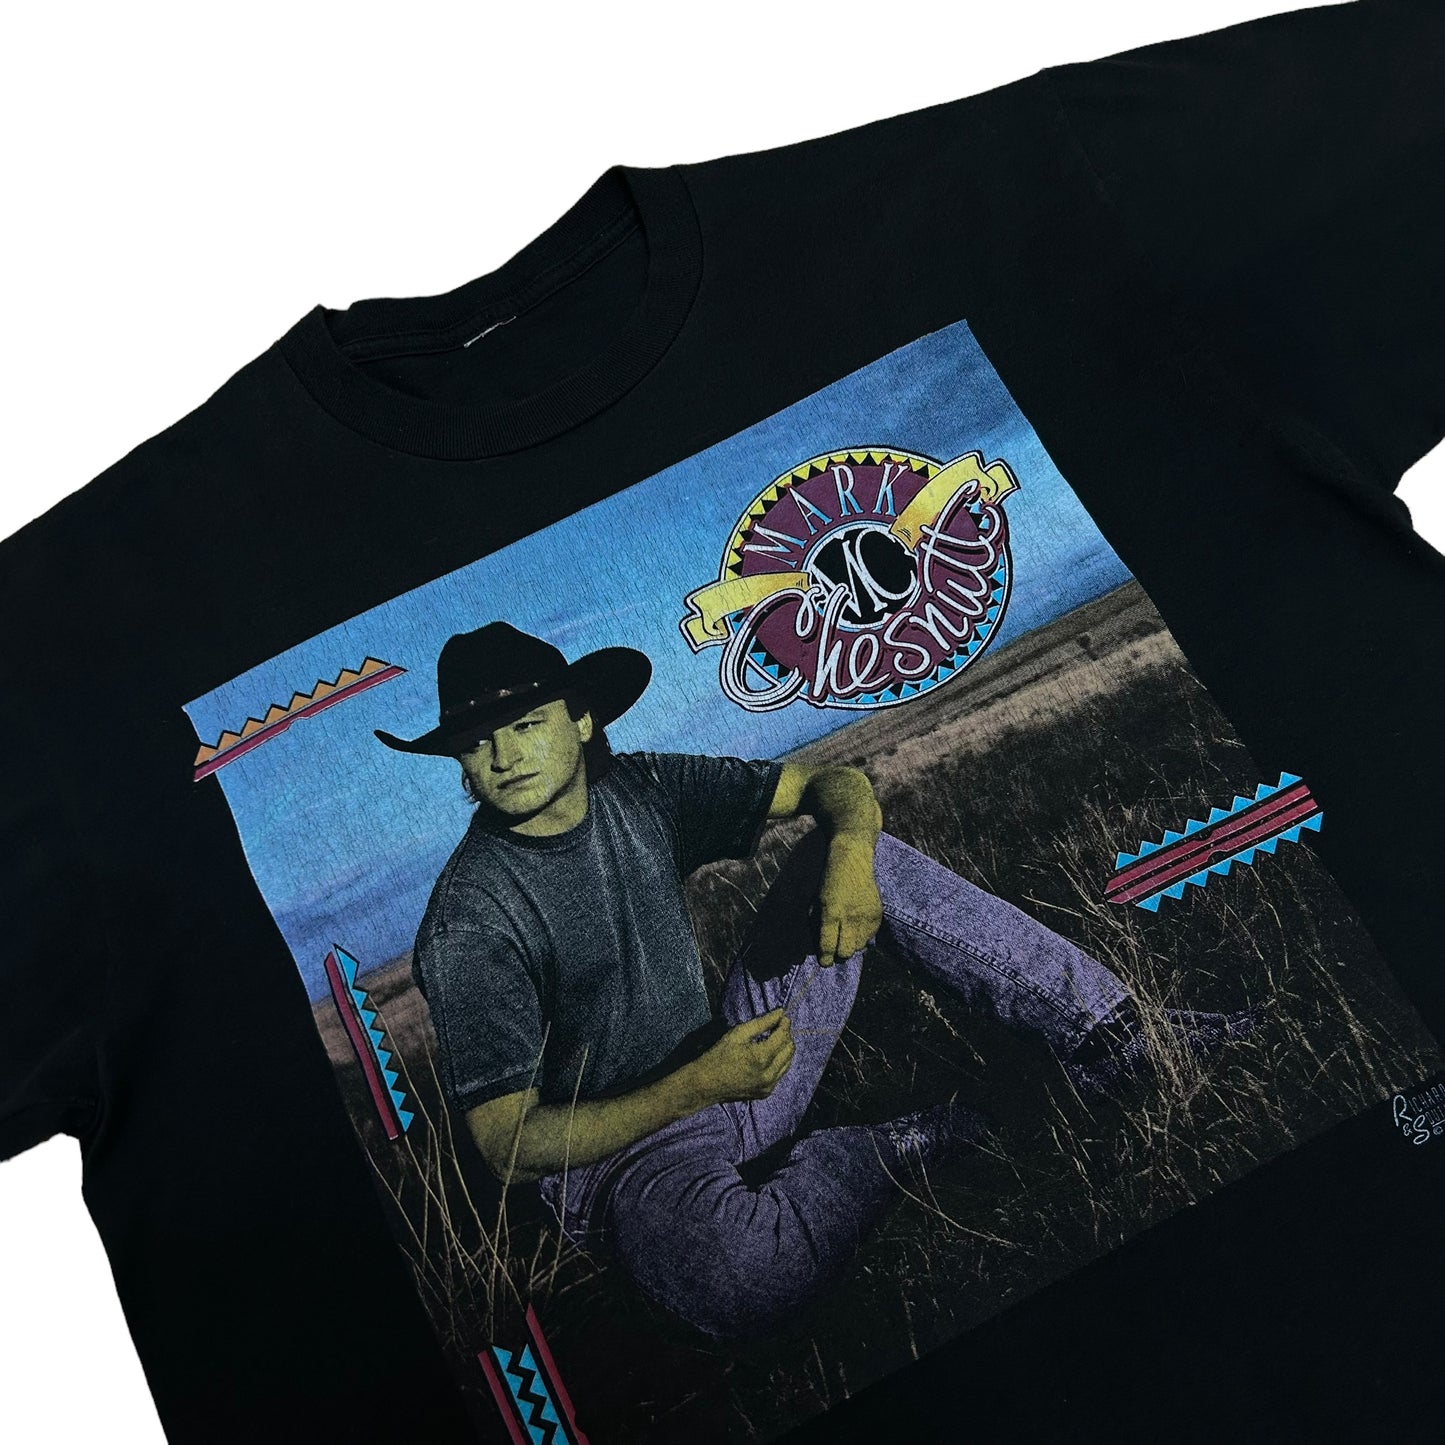 Vintage 1990s Mark Chesnutt “Almost Goodbye” Black Country Music Graphic T-Shirt - Size XL